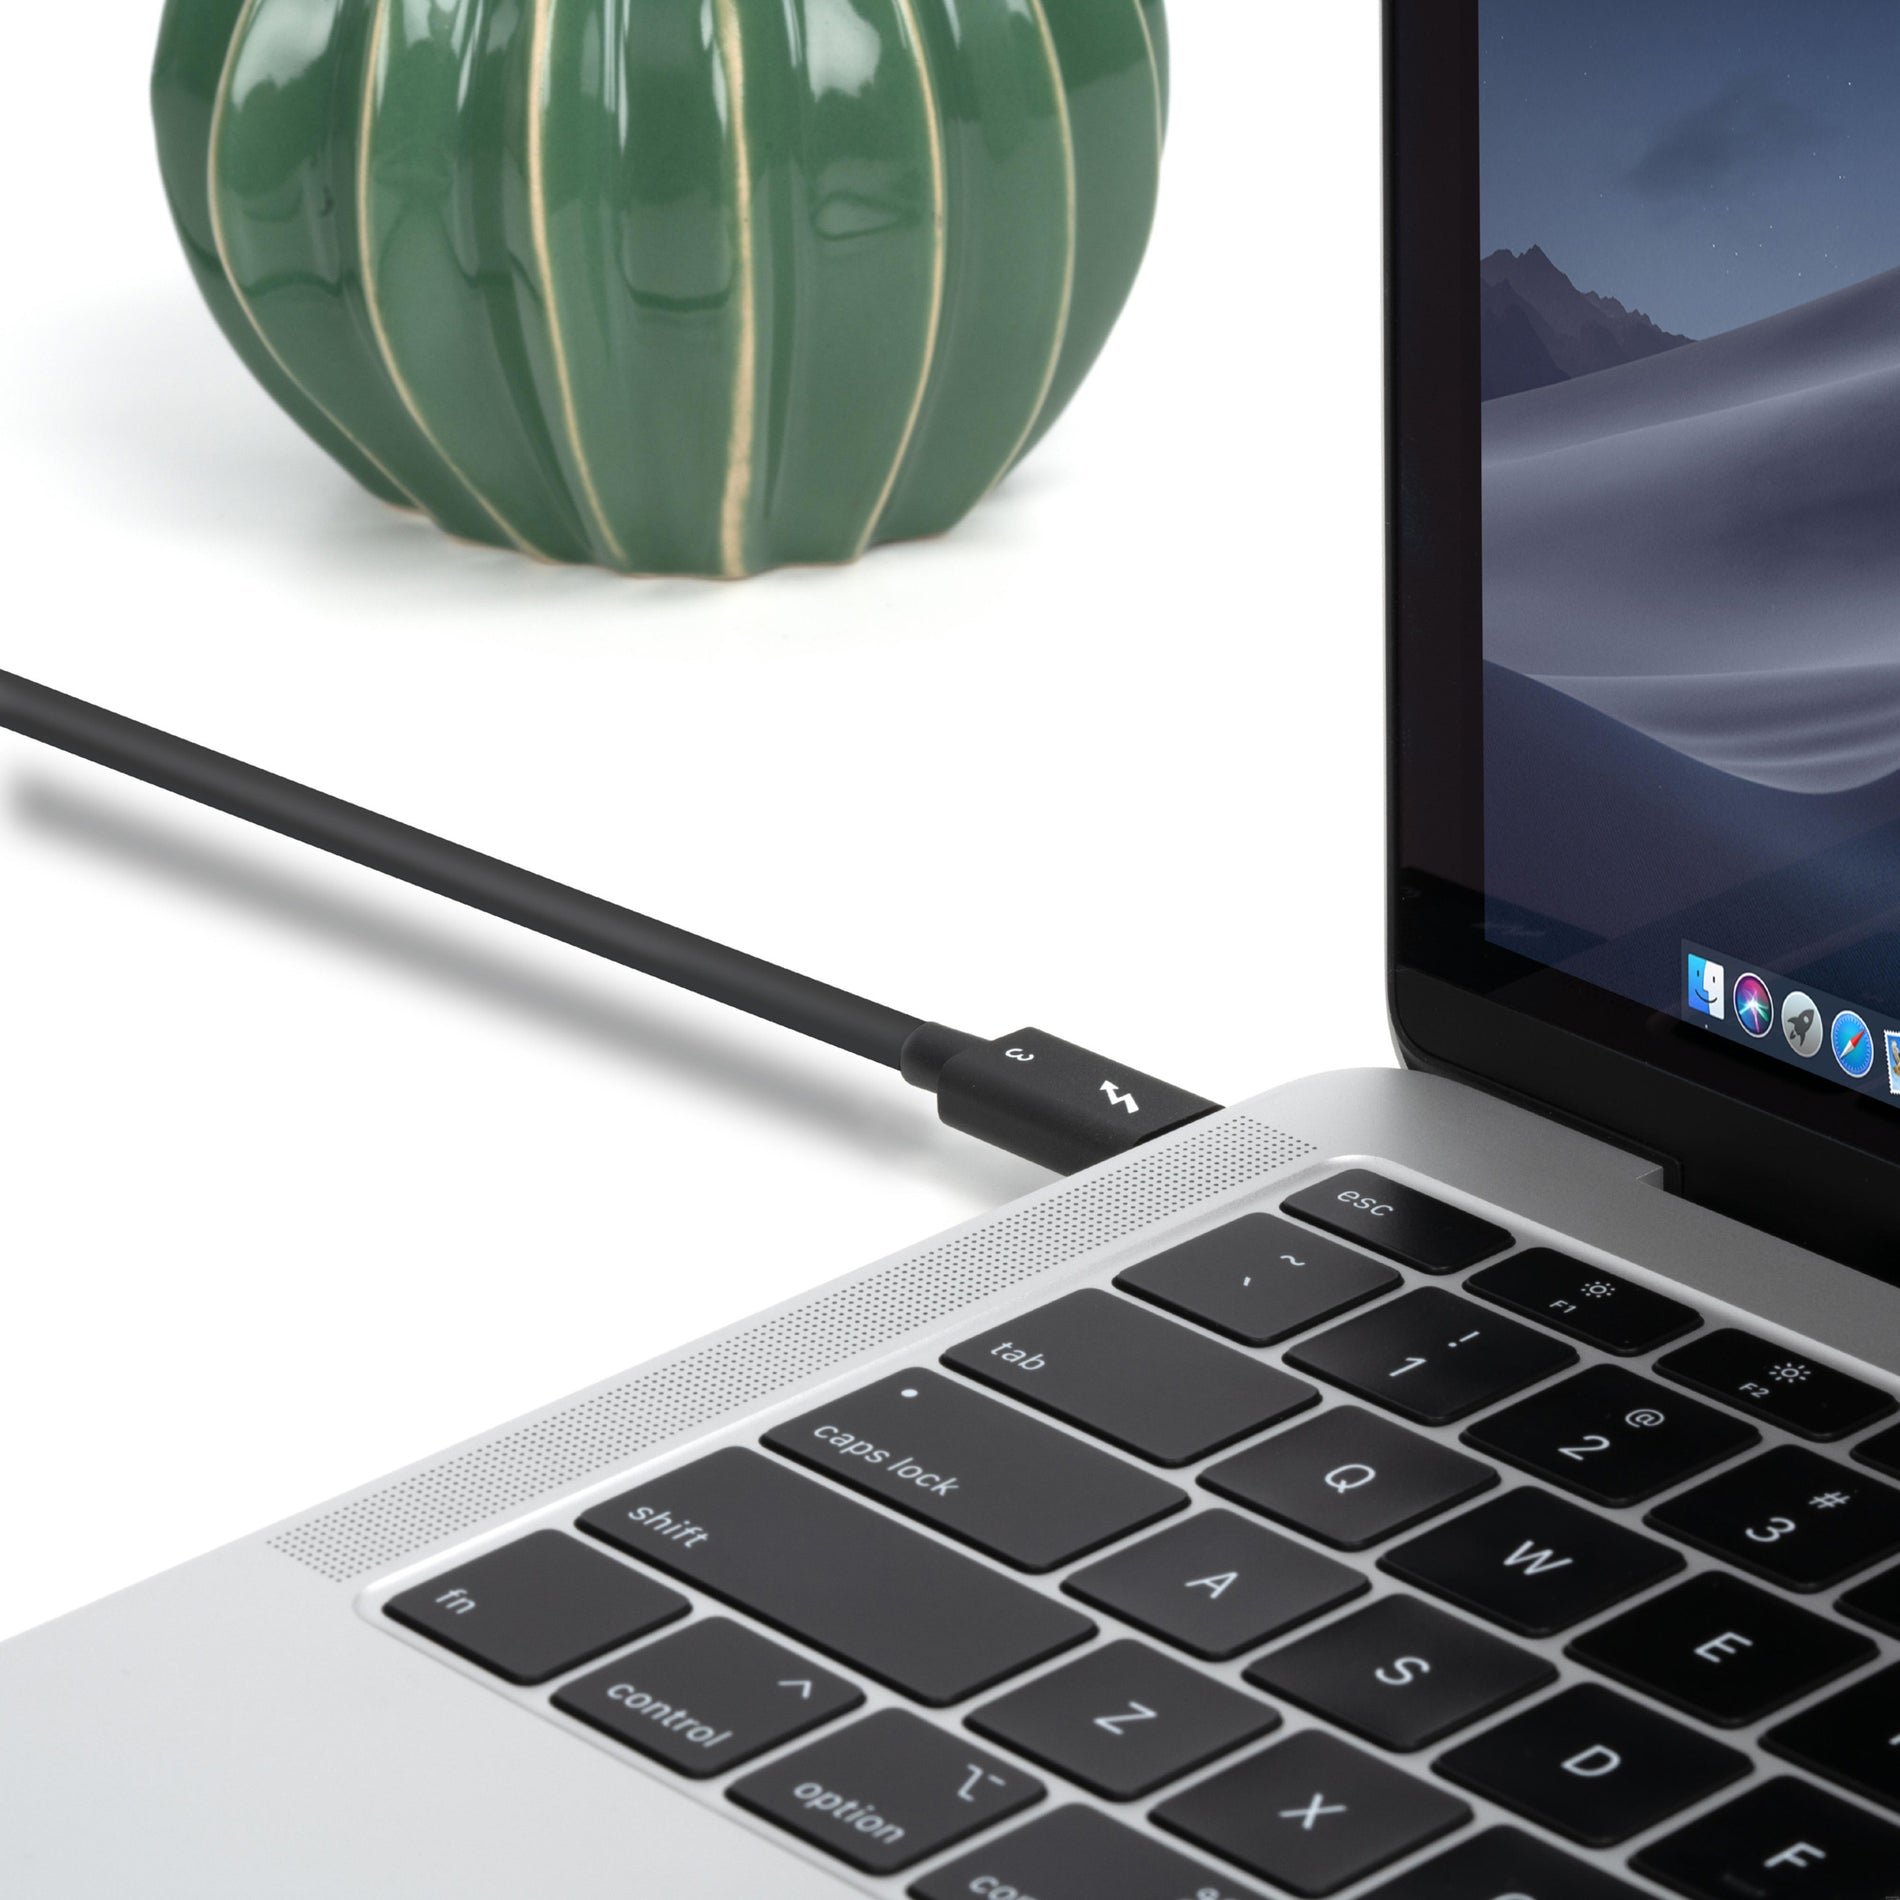 Plugable TBT3-40G80CM Thunderbolt 3 Cable (40GBPS, 2.6FT/0.8M), USB-C Power Delivery, Fast Data Transfer